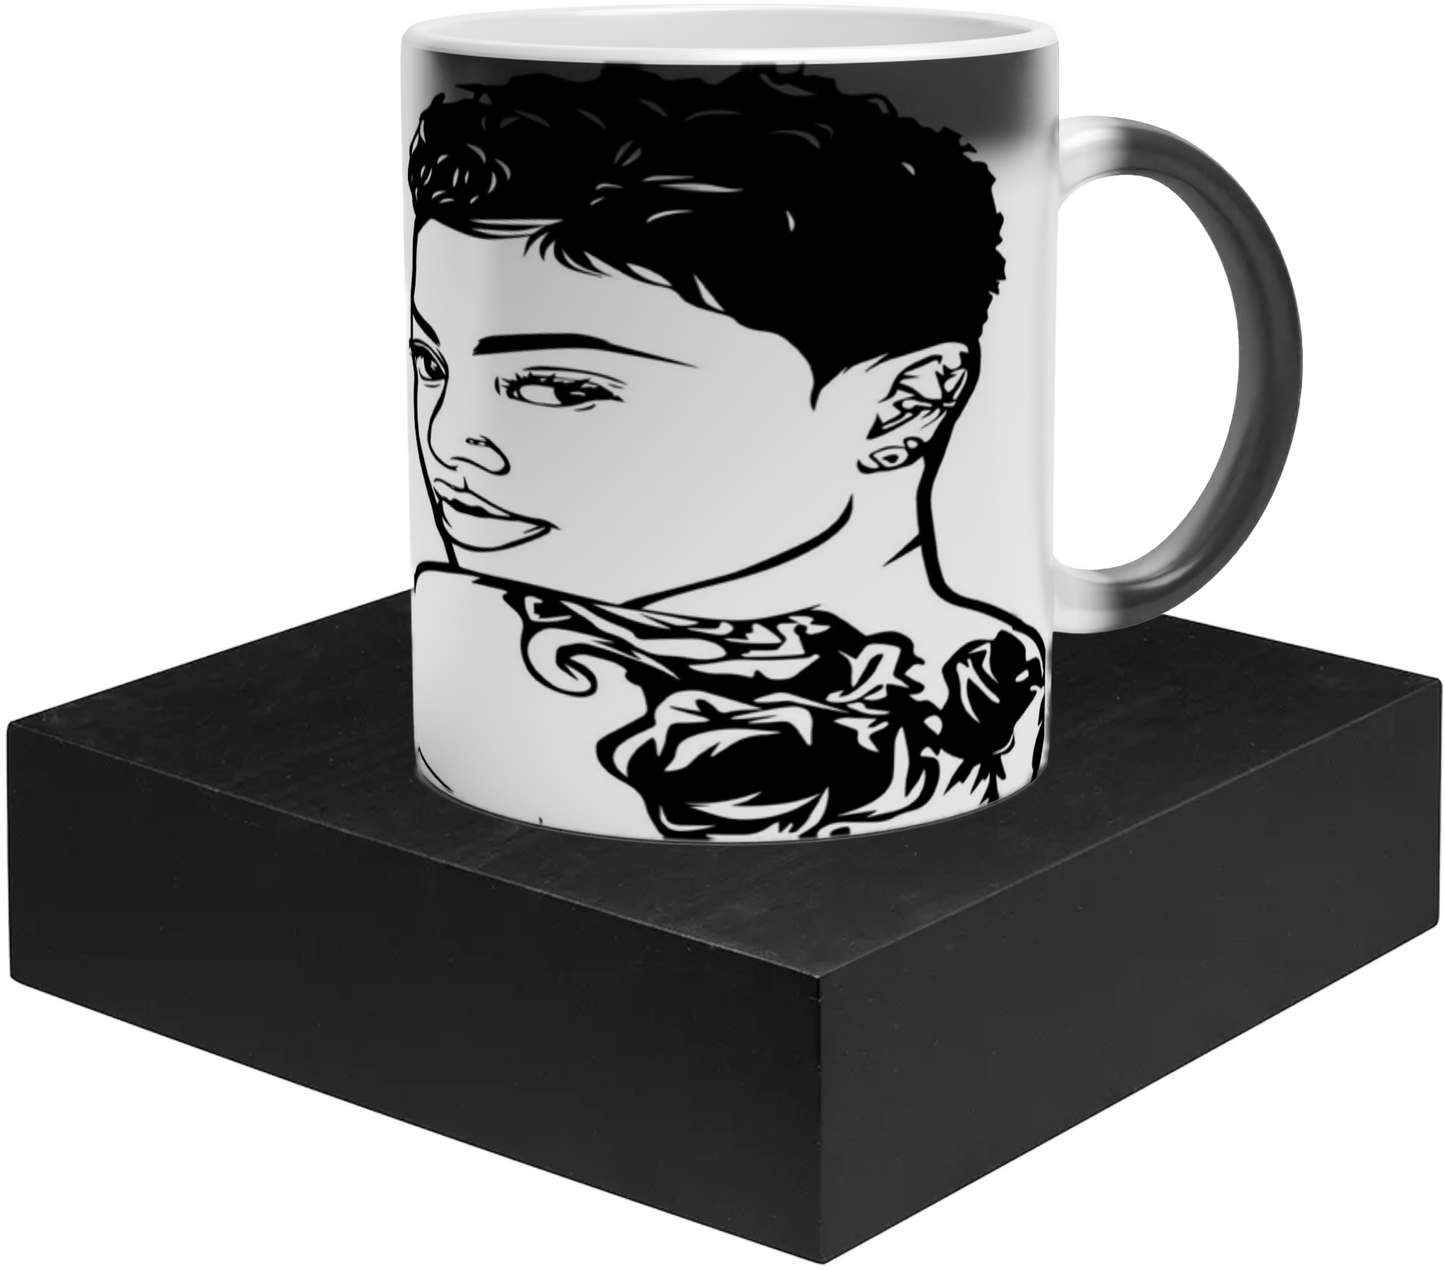 Magic 11oz Black Ceramic Mug - Image Reveal-  Image can be positioned left, right or centered - When a hot beverage is added, the mug reveals your beautiful artwork!